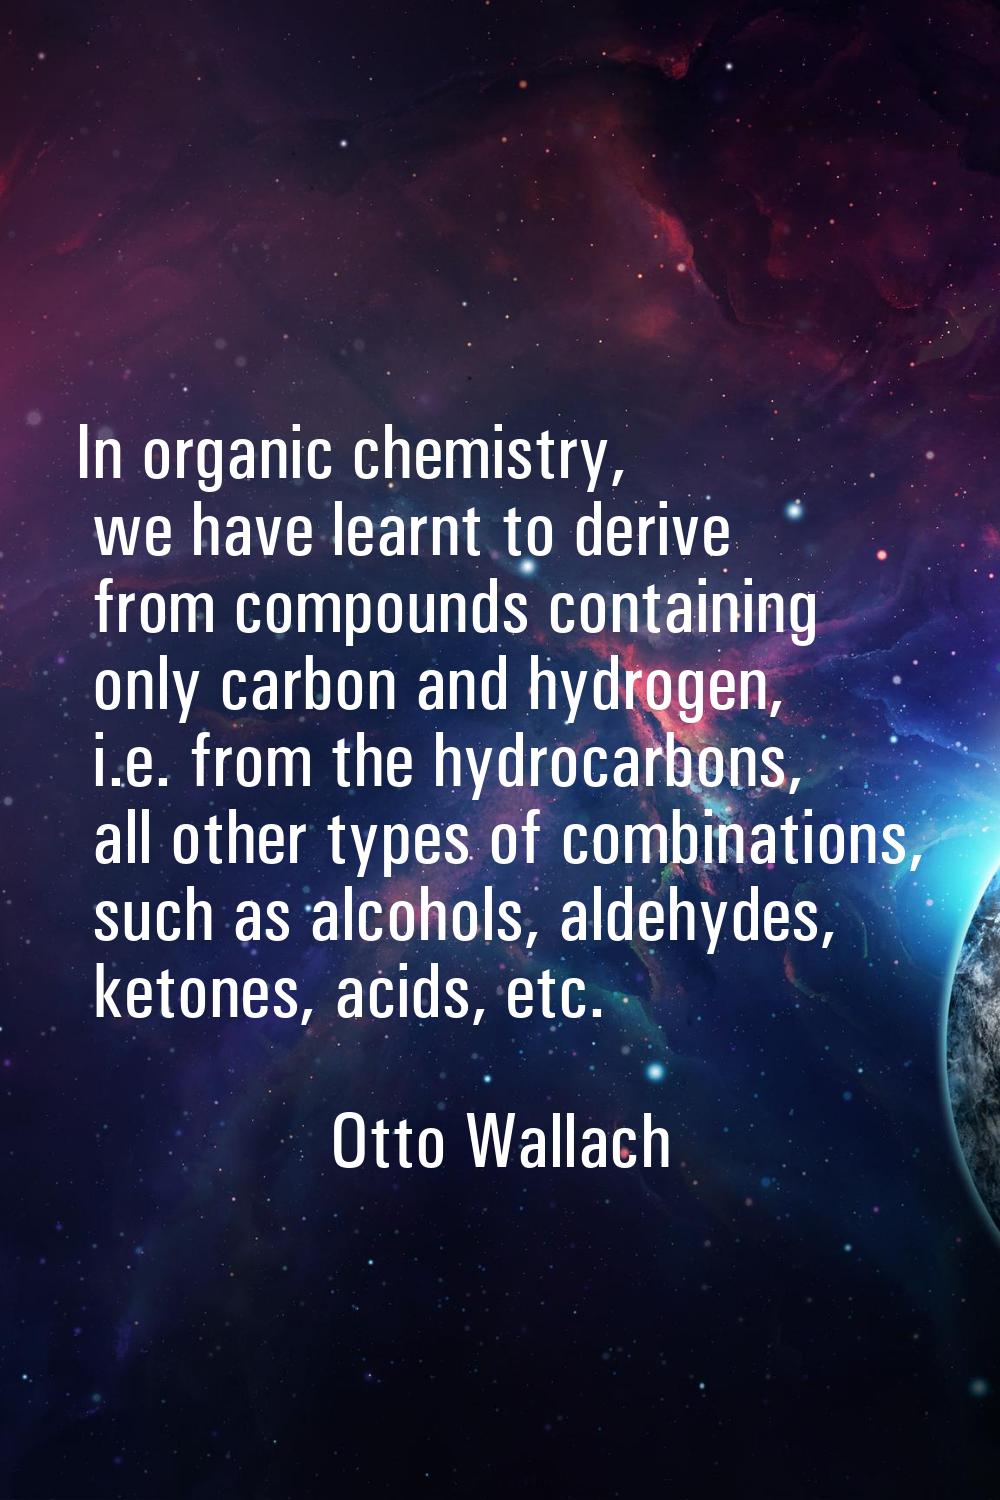 In organic chemistry, we have learnt to derive from compounds containing only carbon and hydrogen, 